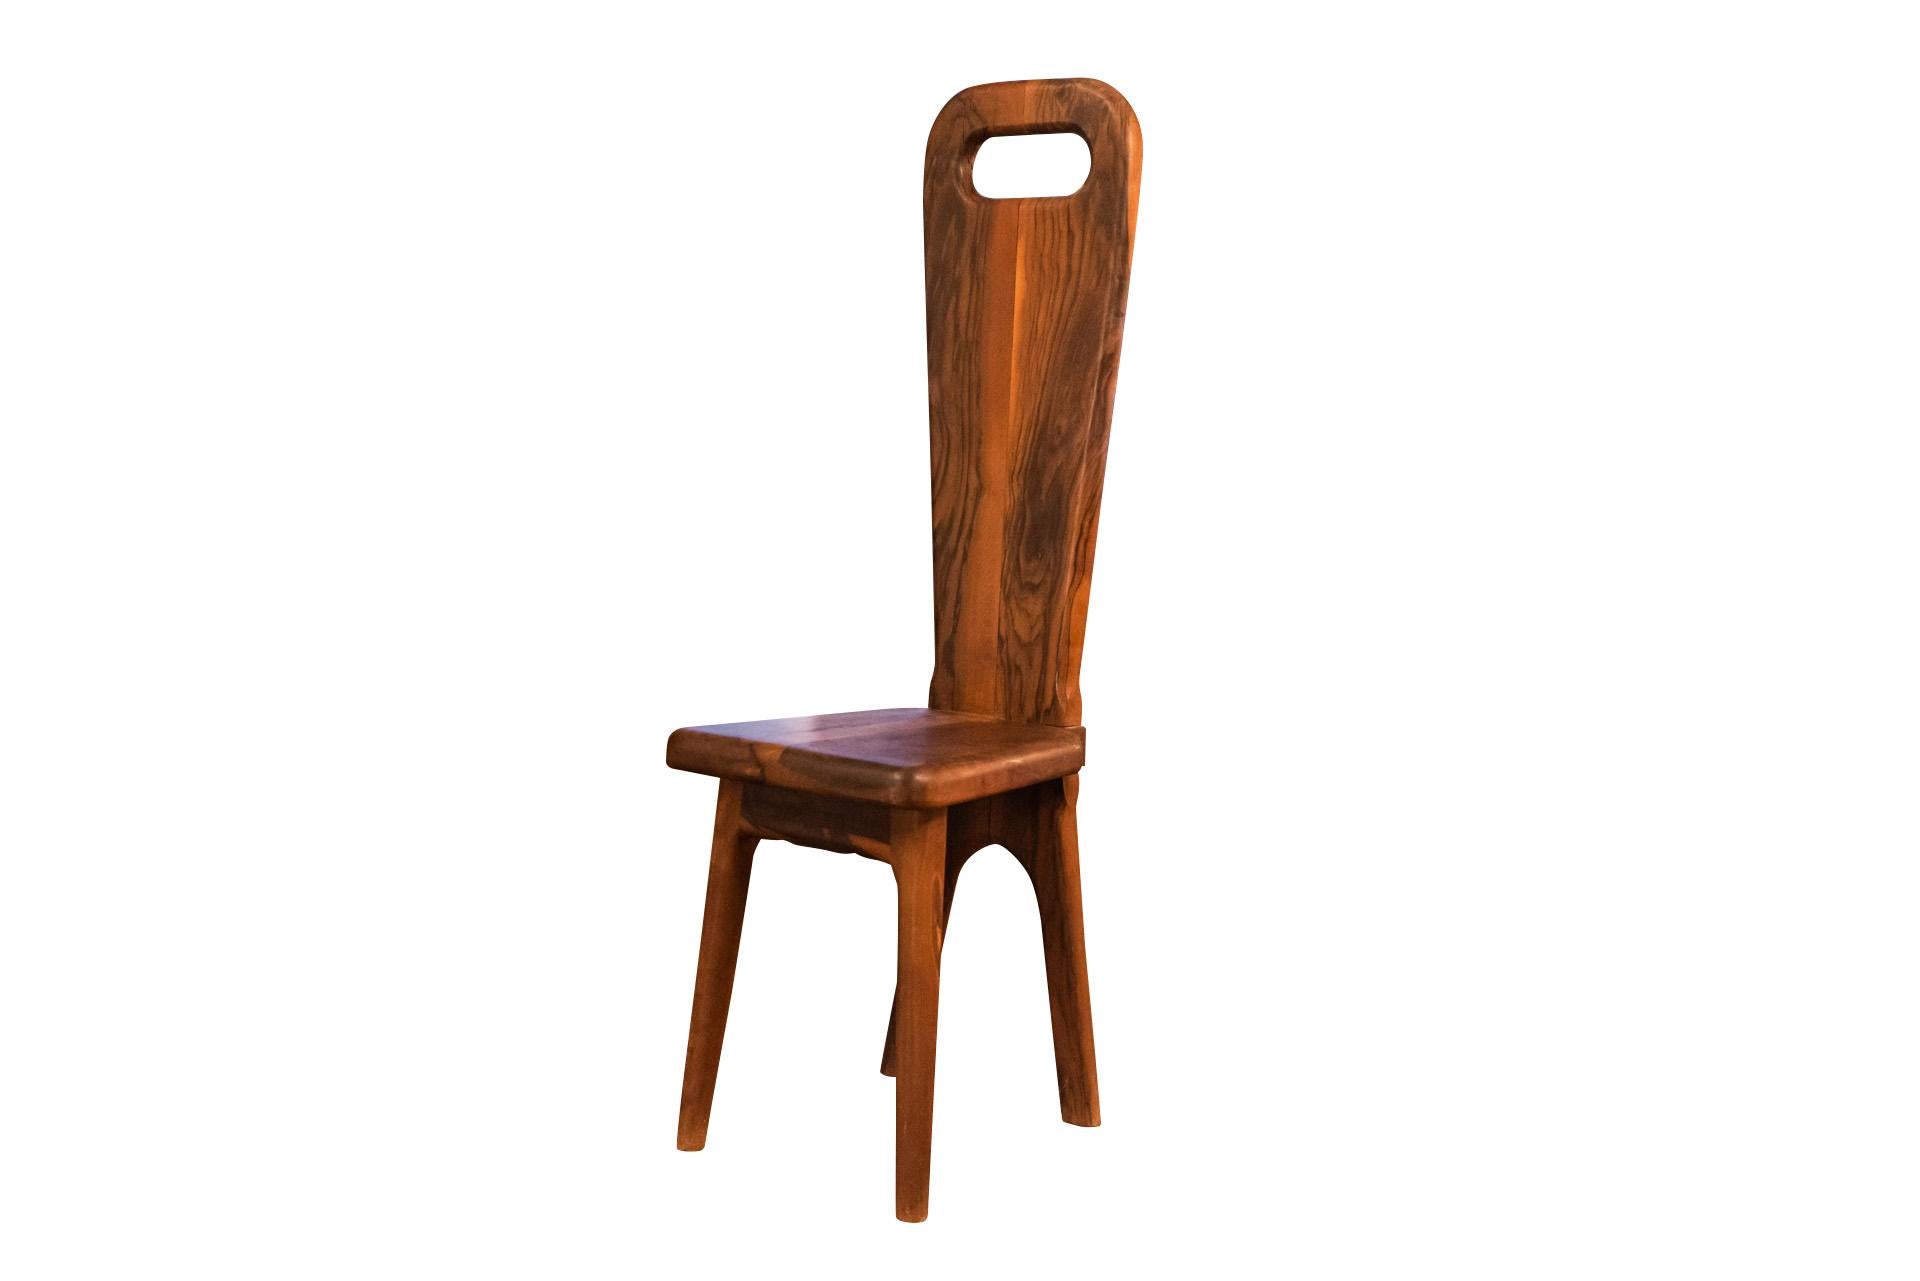 Maison Dubosq, Pairs of chairs in olive wood,
High rectangular backrest with openwork grip on the upper part,
Quadripod base,
circa 1970, Tourettes-sur-loup, France.

Measures : Height 109 cm, Width 33 cm, Depth 34 cm. 

Maison Dubosq is a